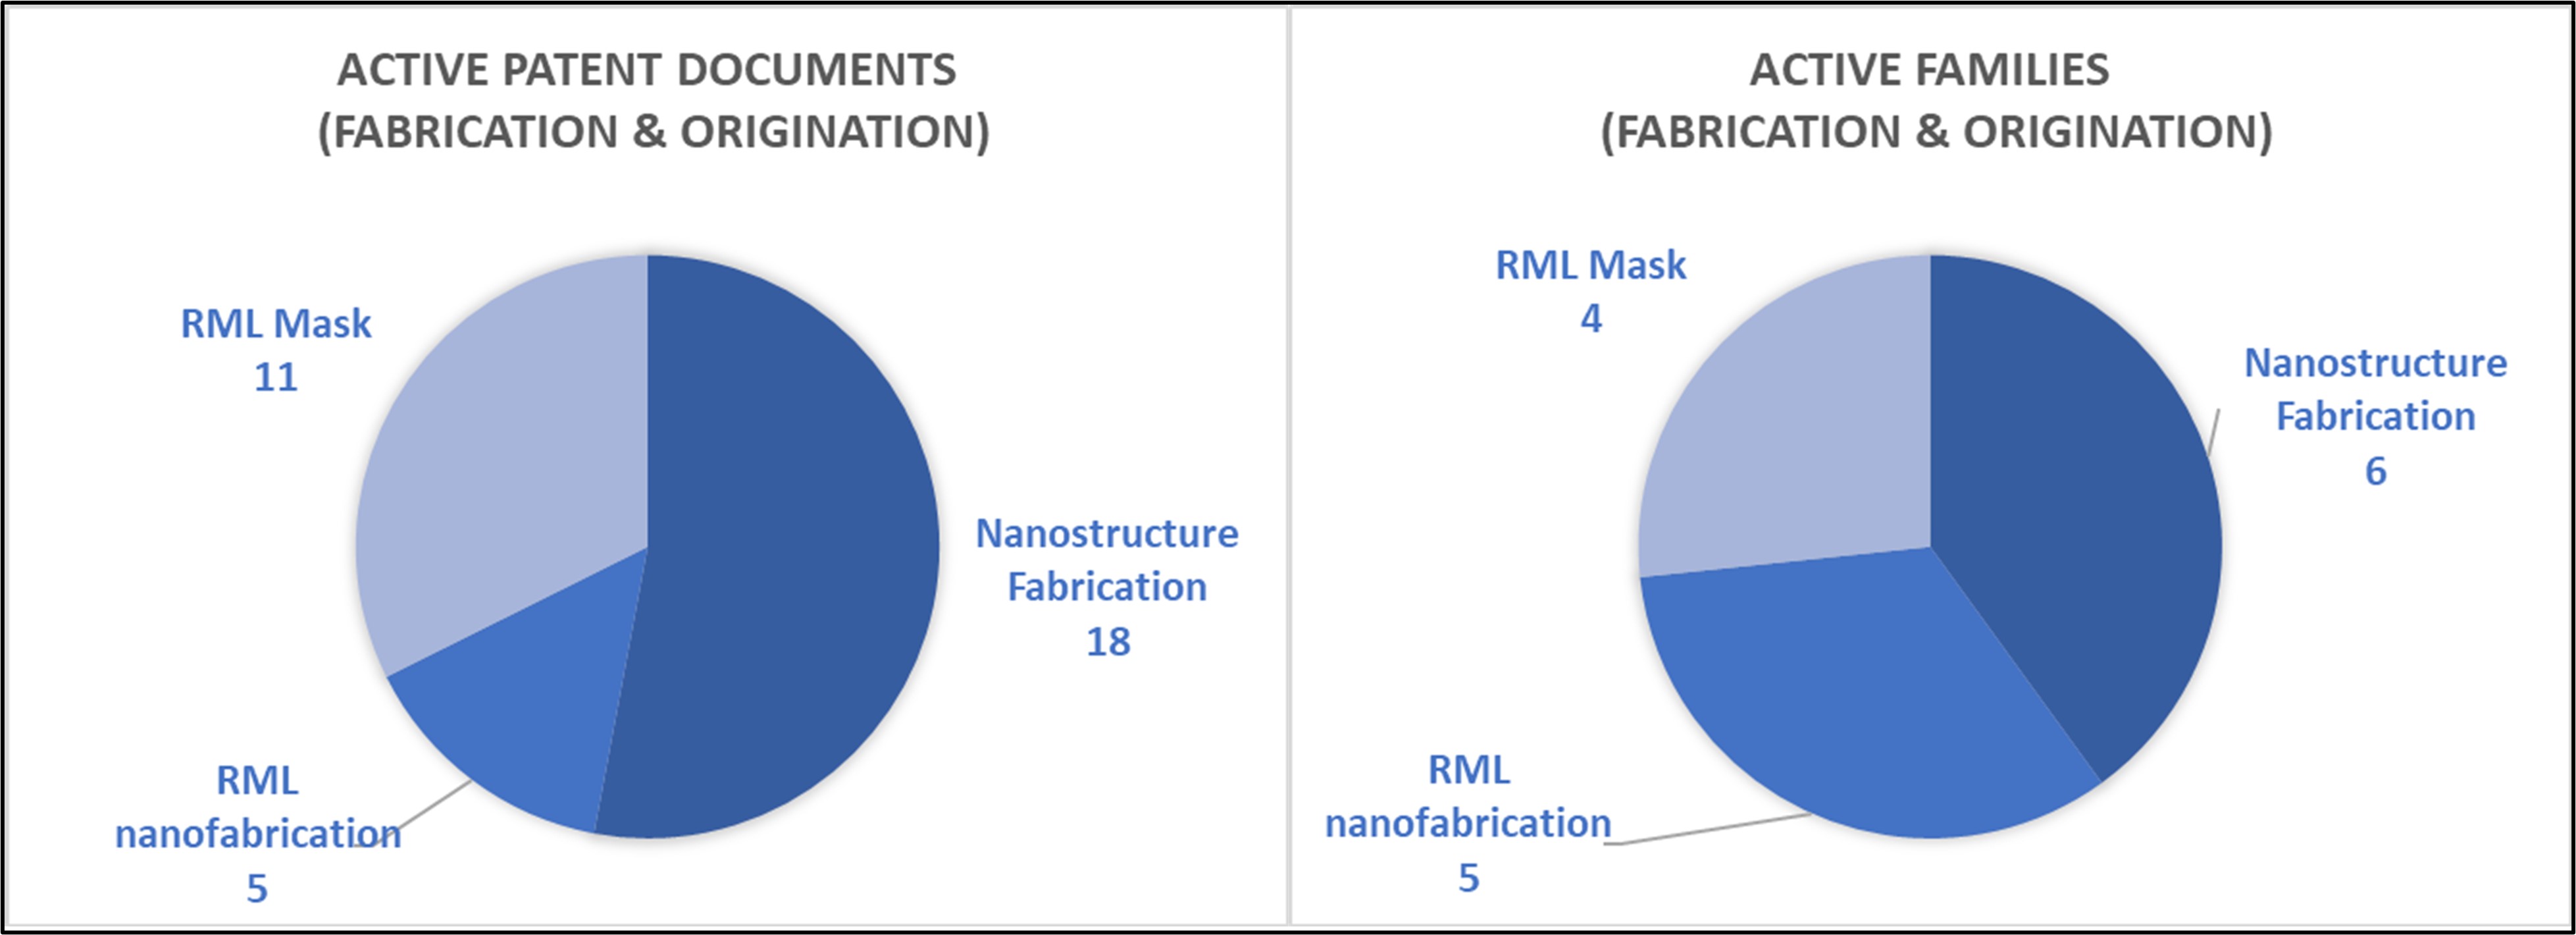 Active Patent Documents Fabrication and Origination